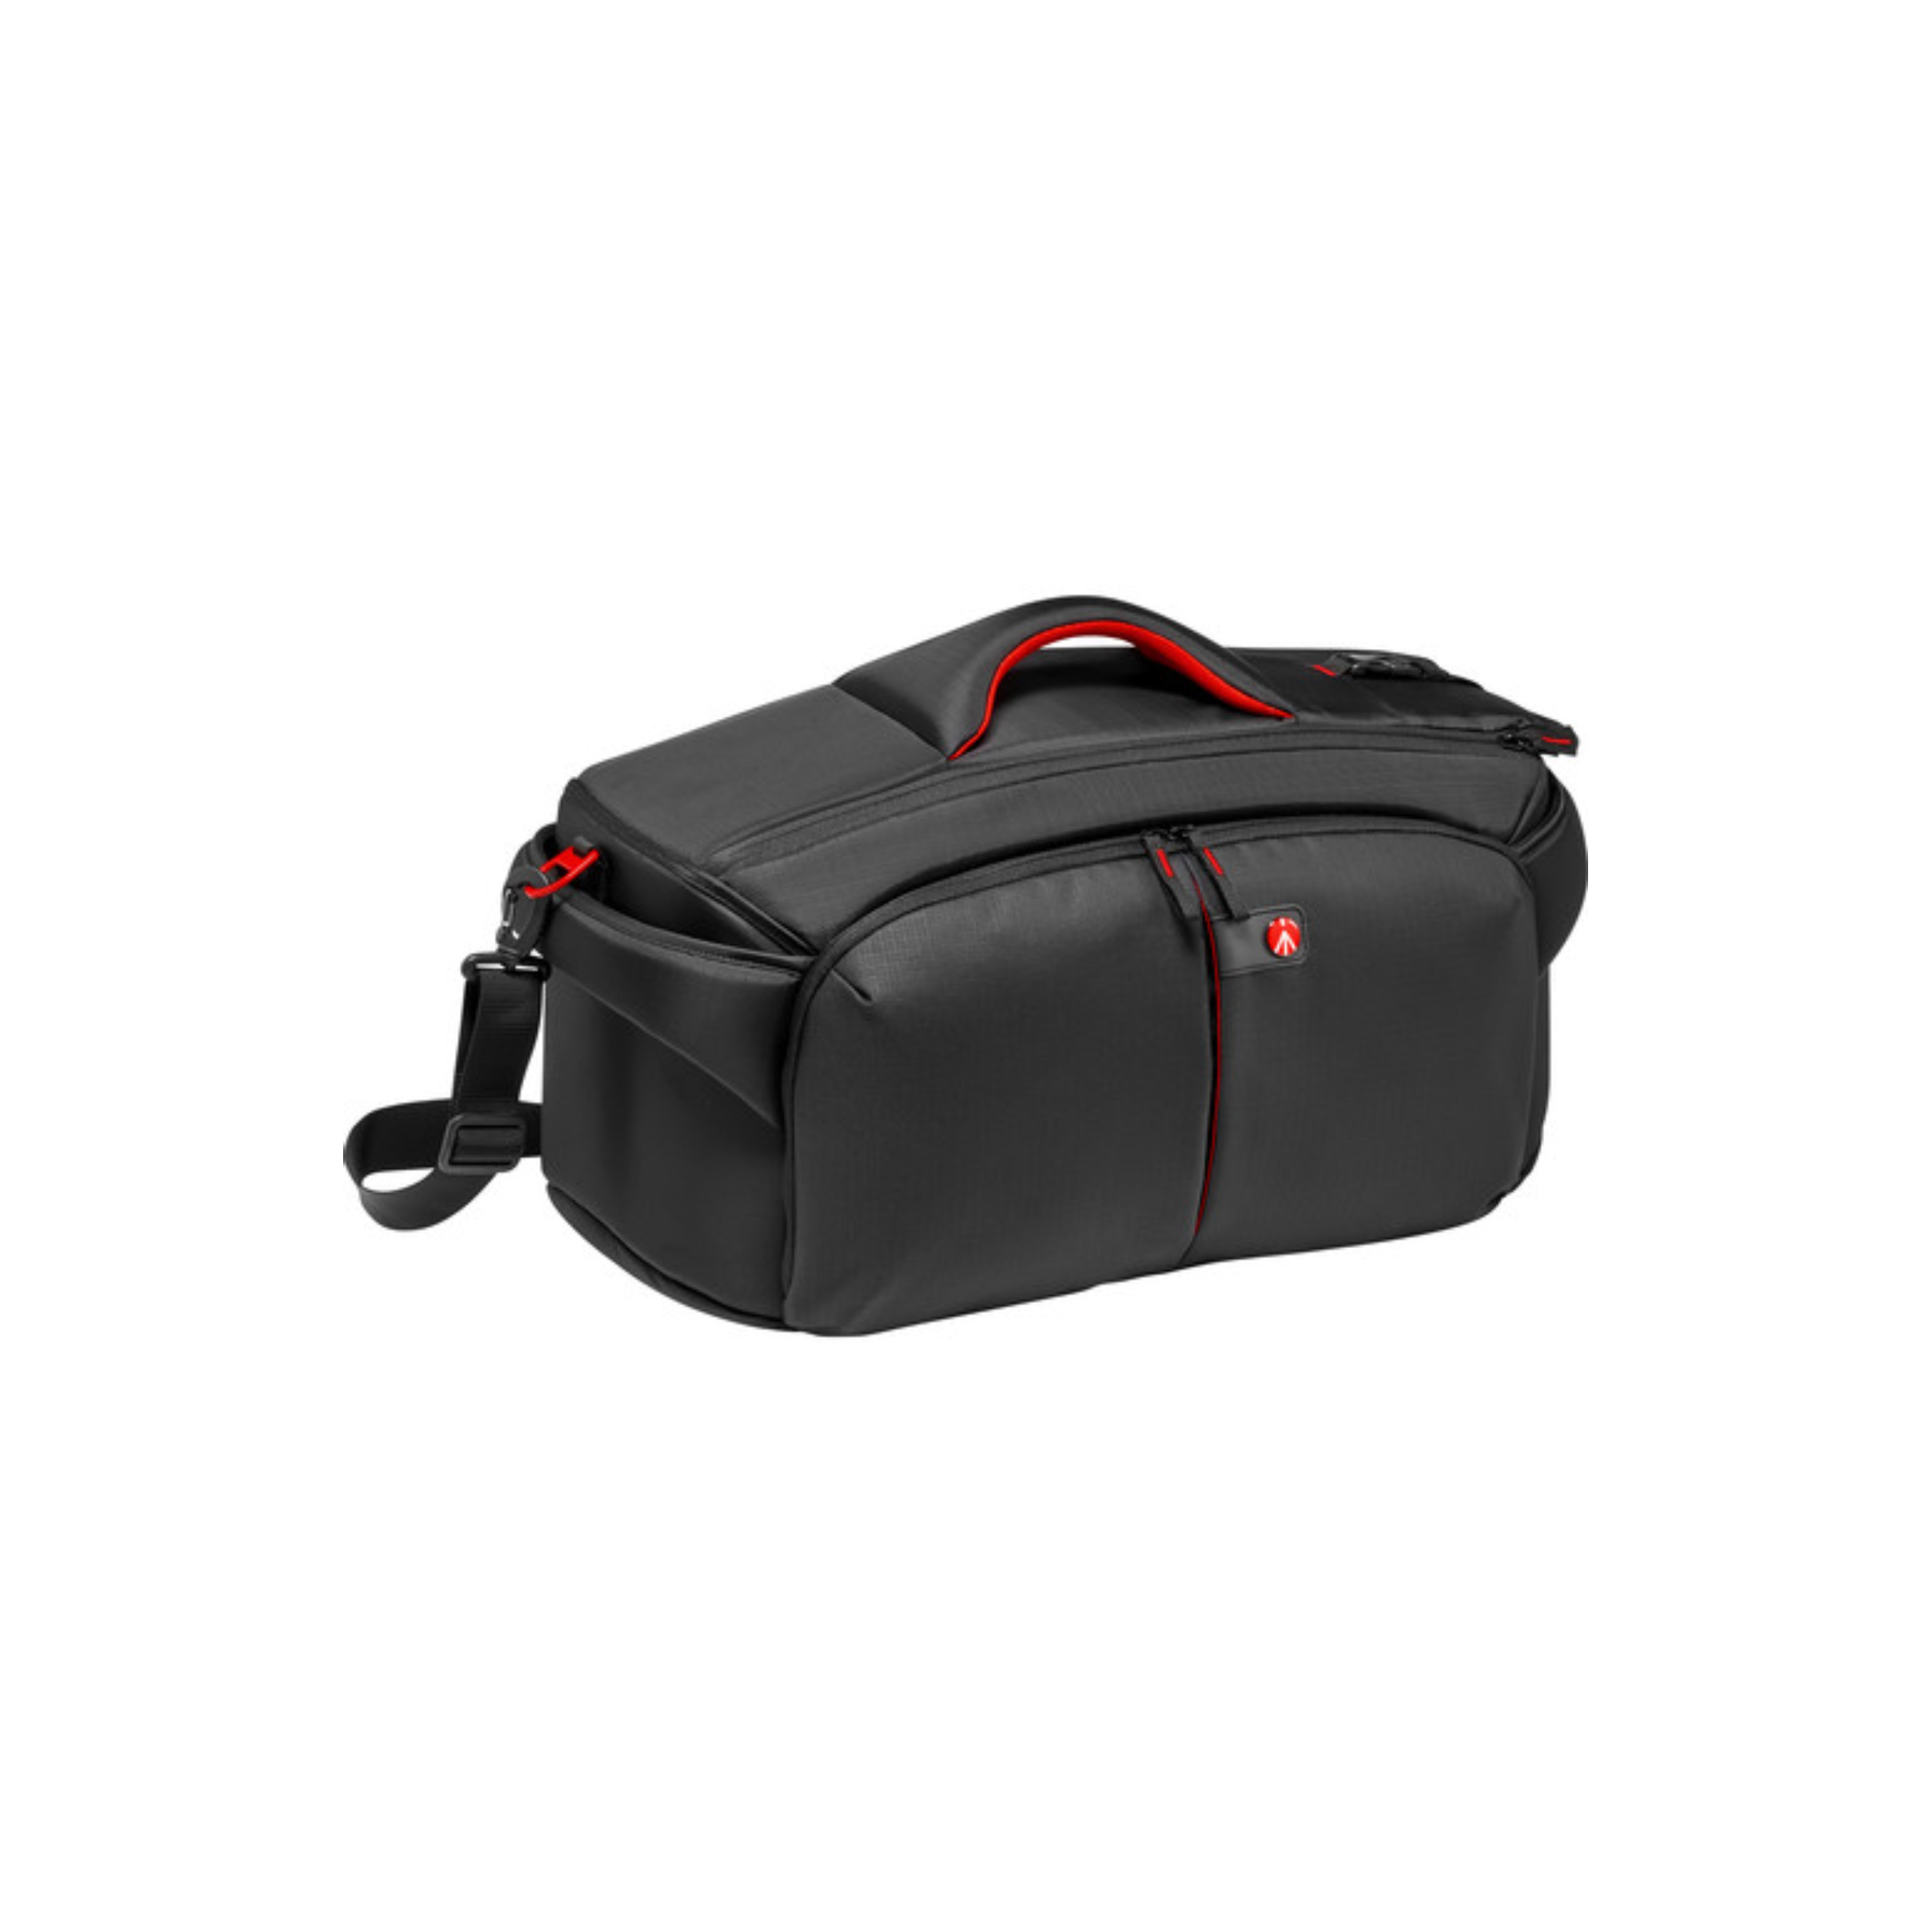 Manfrotto MB PL-CC-193N 193N Pro Light Camcorder Case for Sony PMW-X200, HDV & DSLR Cameras